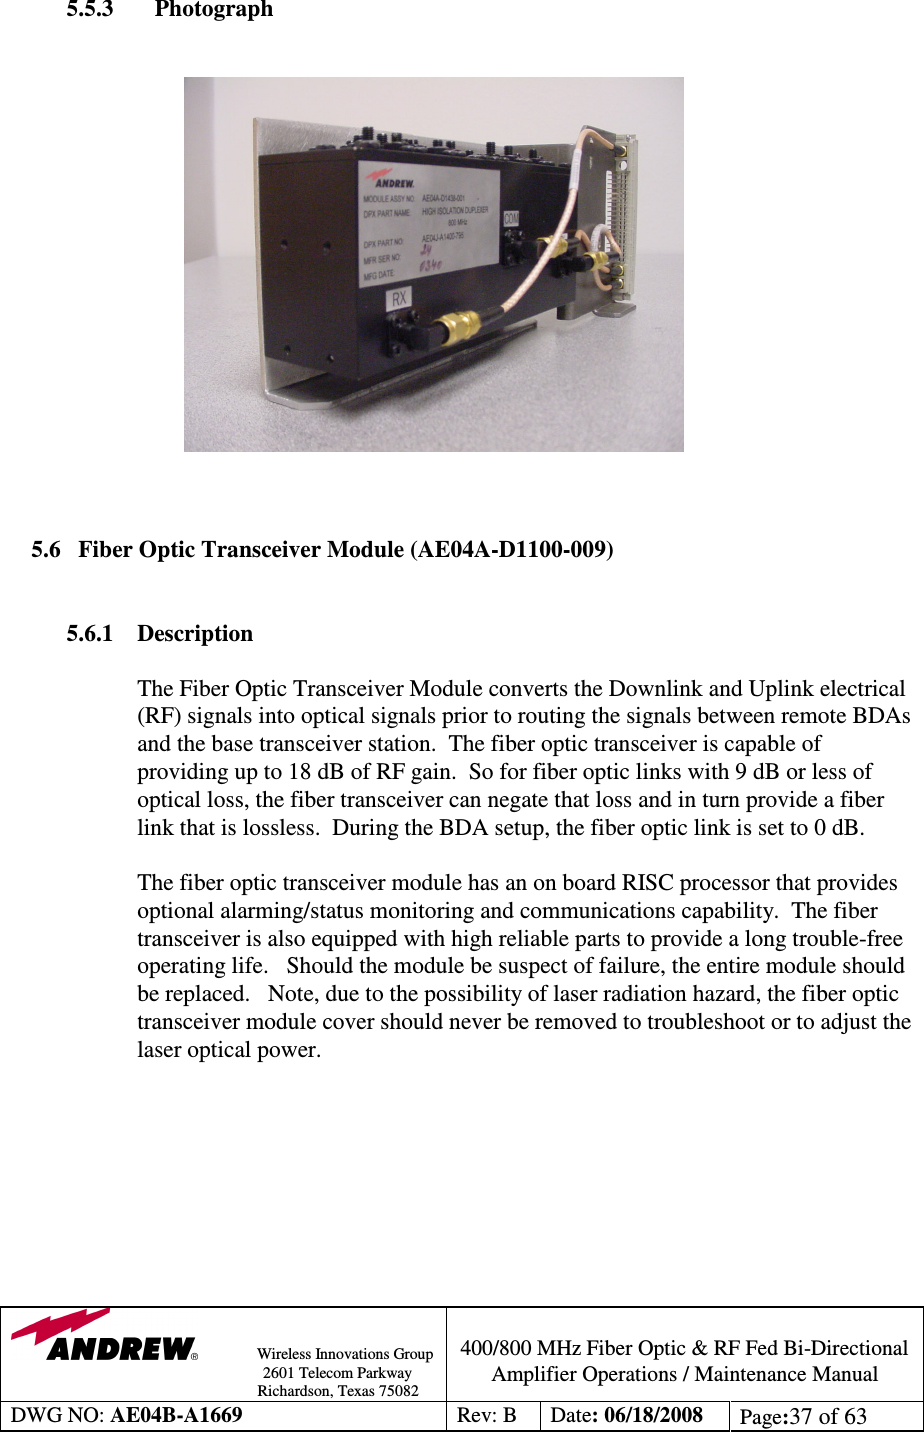                Wireless Innovations Group                                                                                        2601 Telecom Parkway                                                         Richardson, Texas 75082  400/800 MHz Fiber Optic &amp; RF Fed Bi-Directional Amplifier Operations / Maintenance Manual DWG NO: AE04B-A1669  Rev: B  Date: 06/18/2008  Page:37 of 63  5.5.3    Photograph                                        5.6 Fiber Optic Transceiver Module (AE04A-D1100-009)   5.6.1  Description  The Fiber Optic Transceiver Module converts the Downlink and Uplink electrical (RF) signals into optical signals prior to routing the signals between remote BDAs and the base transceiver station.  The fiber optic transceiver is capable of providing up to 18 dB of RF gain.  So for fiber optic links with 9 dB or less of optical loss, the fiber transceiver can negate that loss and in turn provide a fiber link that is lossless.  During the BDA setup, the fiber optic link is set to 0 dB.     The fiber optic transceiver module has an on board RISC processor that provides optional alarming/status monitoring and communications capability.  The fiber transceiver is also equipped with high reliable parts to provide a long trouble-free operating life.   Should the module be suspect of failure, the entire module should be replaced.   Note, due to the possibility of laser radiation hazard, the fiber optic transceiver module cover should never be removed to troubleshoot or to adjust the laser optical power.           